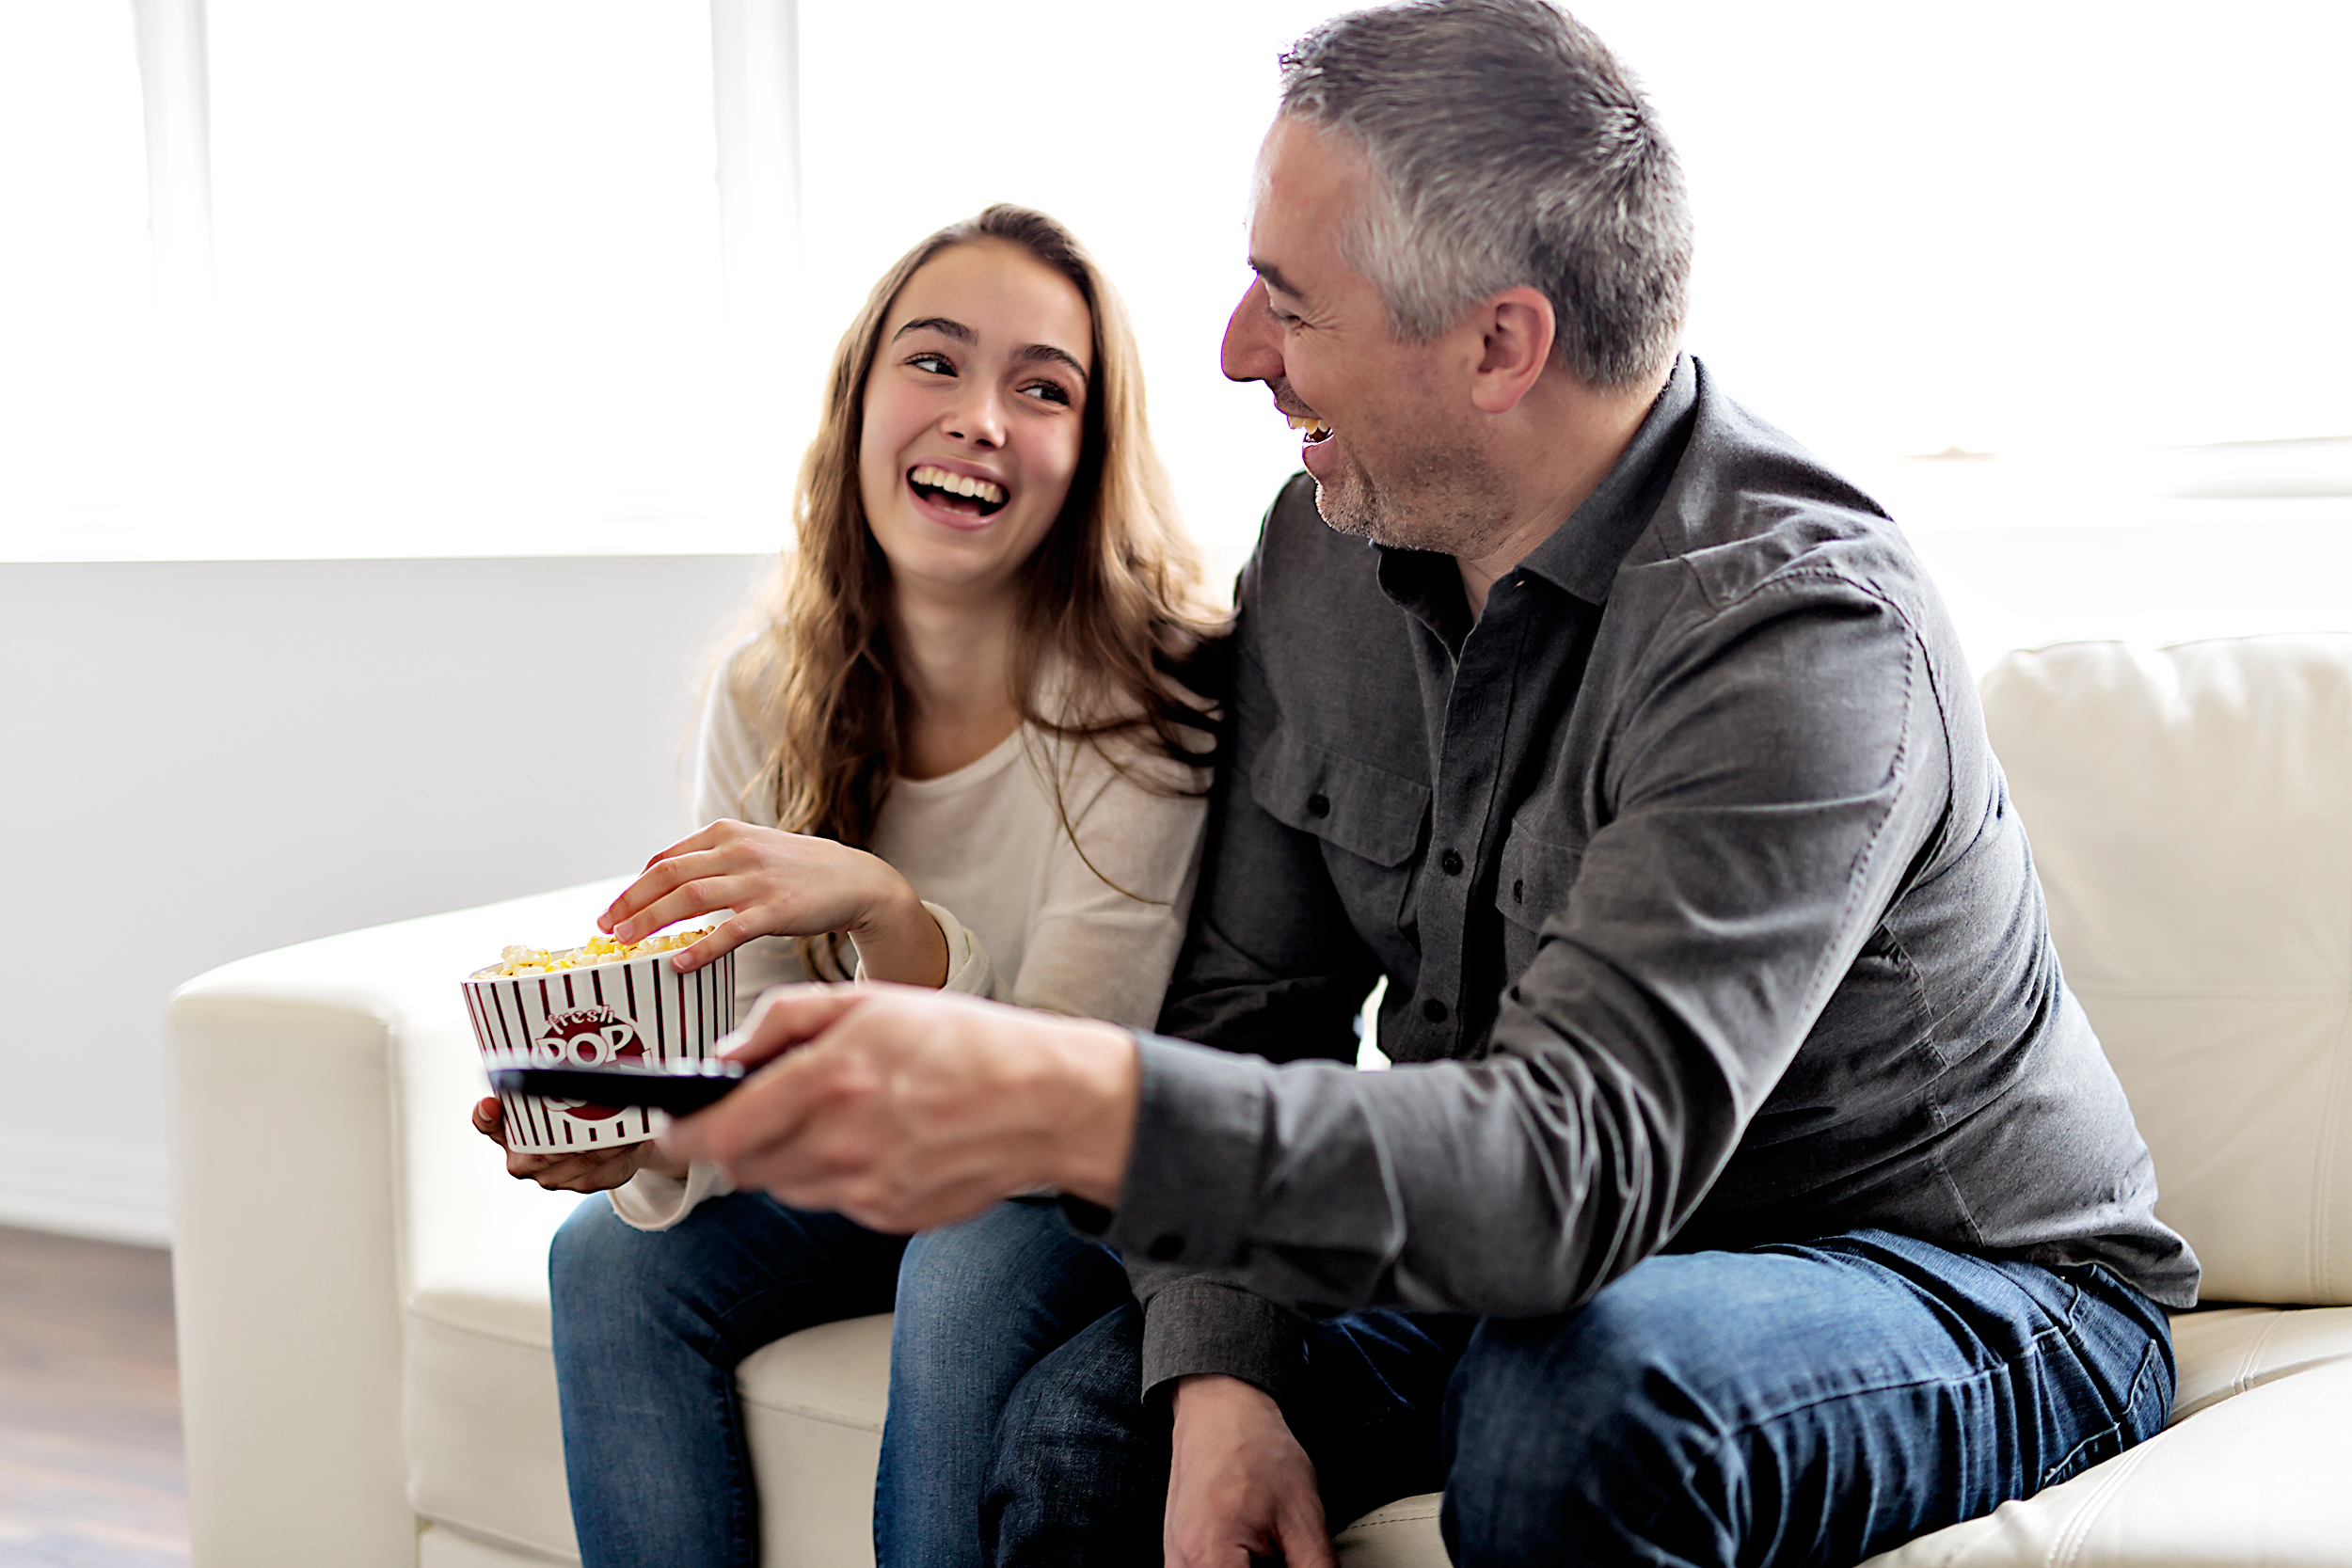 A daddy-daughter duo are pictured laughing together while watching TV and eating popcorn | Source: Shutterstock